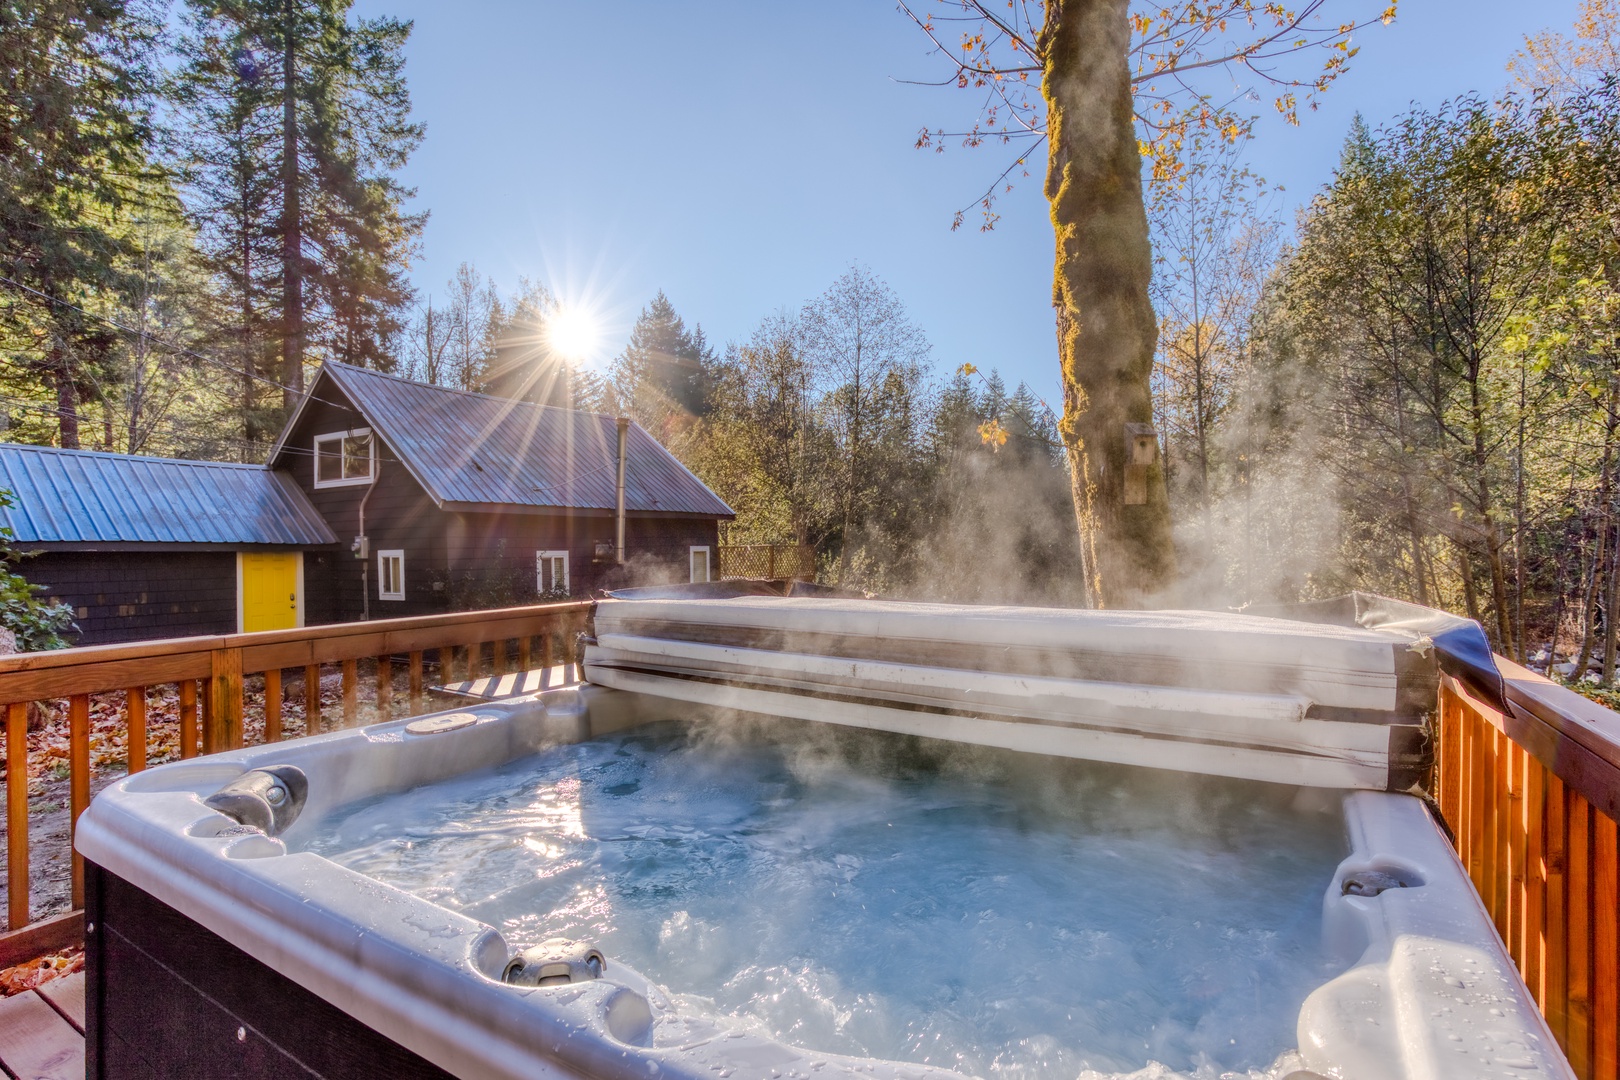 Rhododendron Vacation Rentals, Riverbend Cabin #1 - Enjoy the nature surrounding you while soaking in the Hot Tub